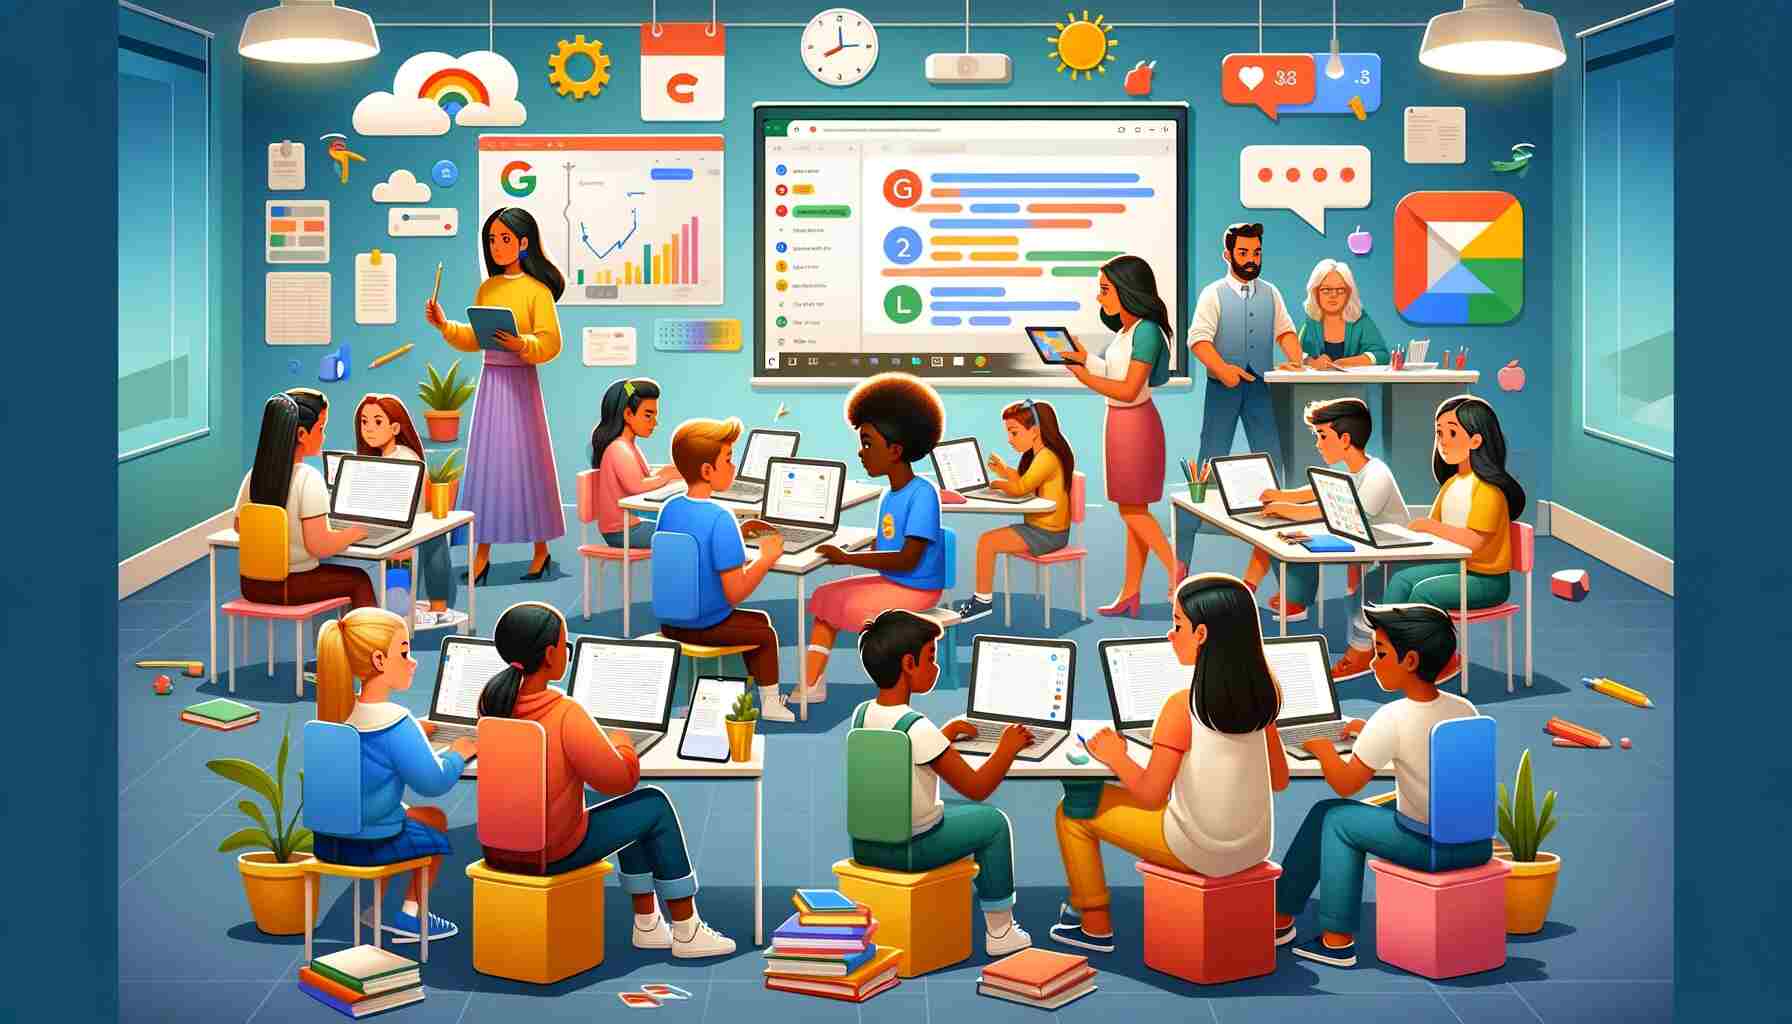 Google Workspace offers a suite of collaboration tools tailored specifically for educational purposes. These include programs like Google Docs, Sheets, Slides, and Forms, which allow students and educators to work together in real-time on documents, spreadsheets, presentations, and surveys.